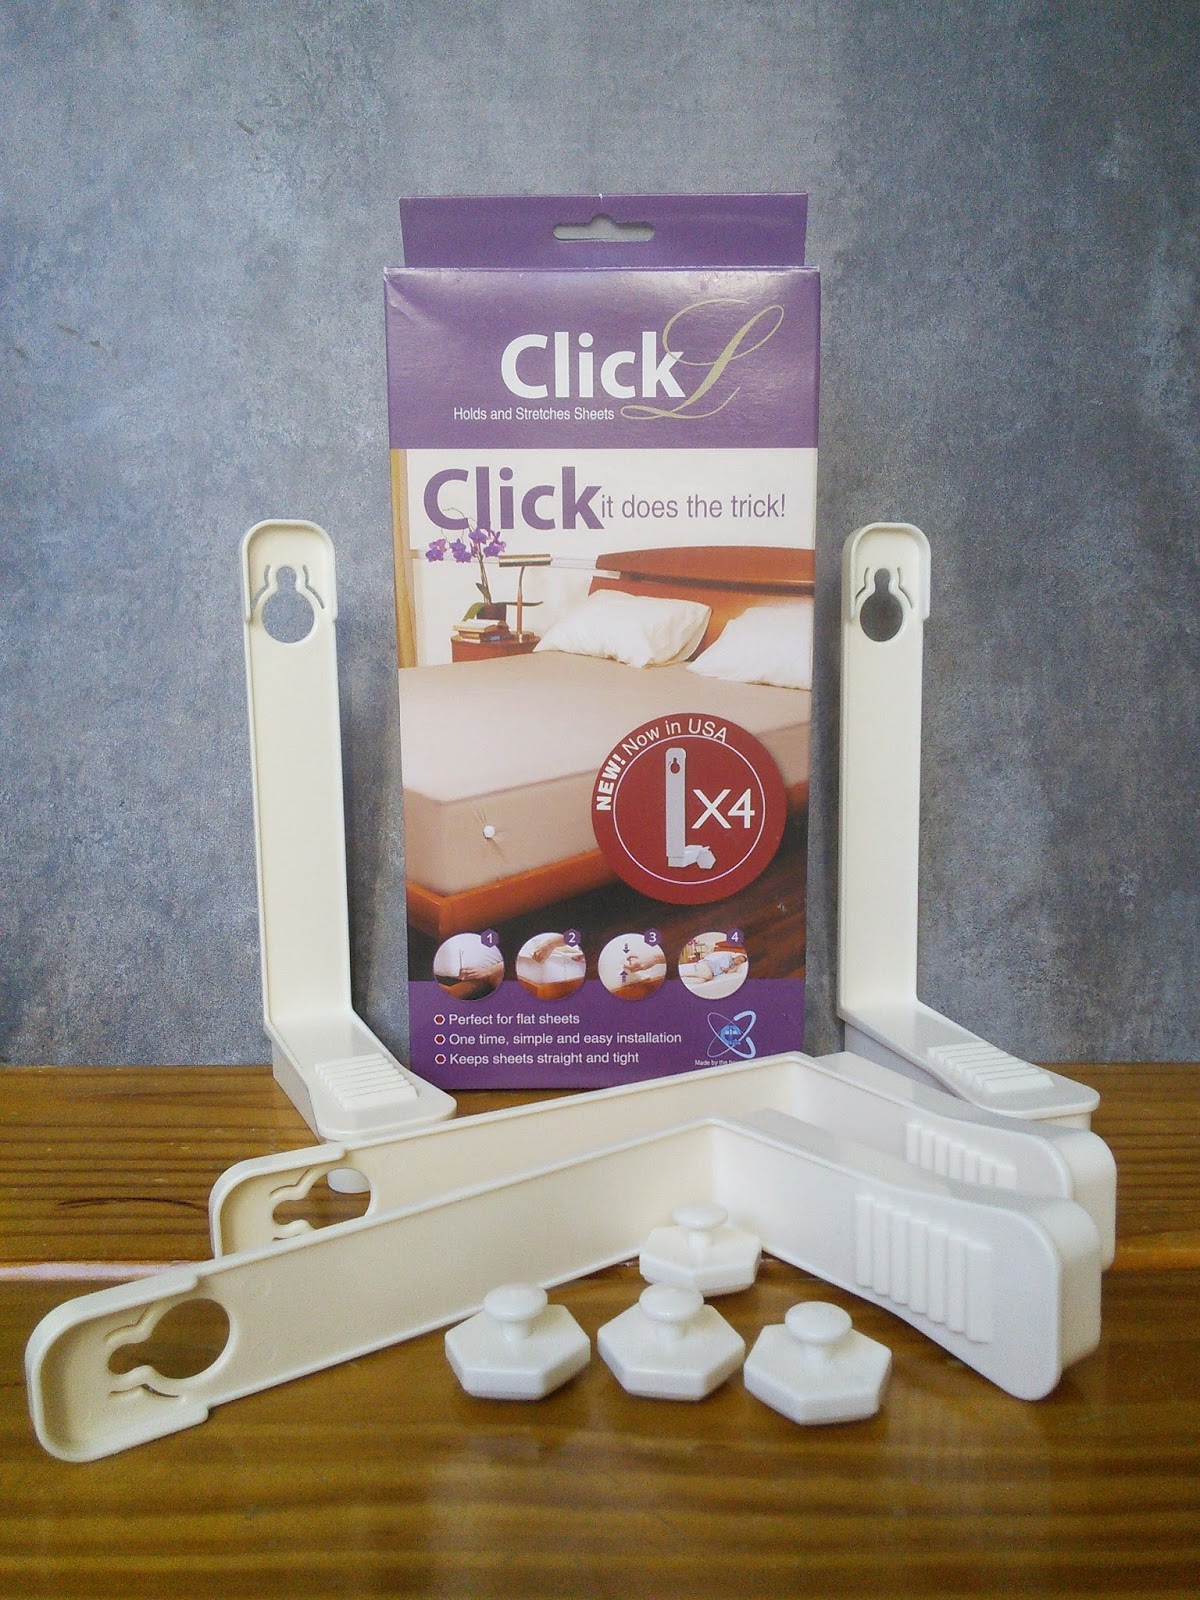 Mom Knows Best: Help Is On The Way For Bed Sheet Problems With ClickL